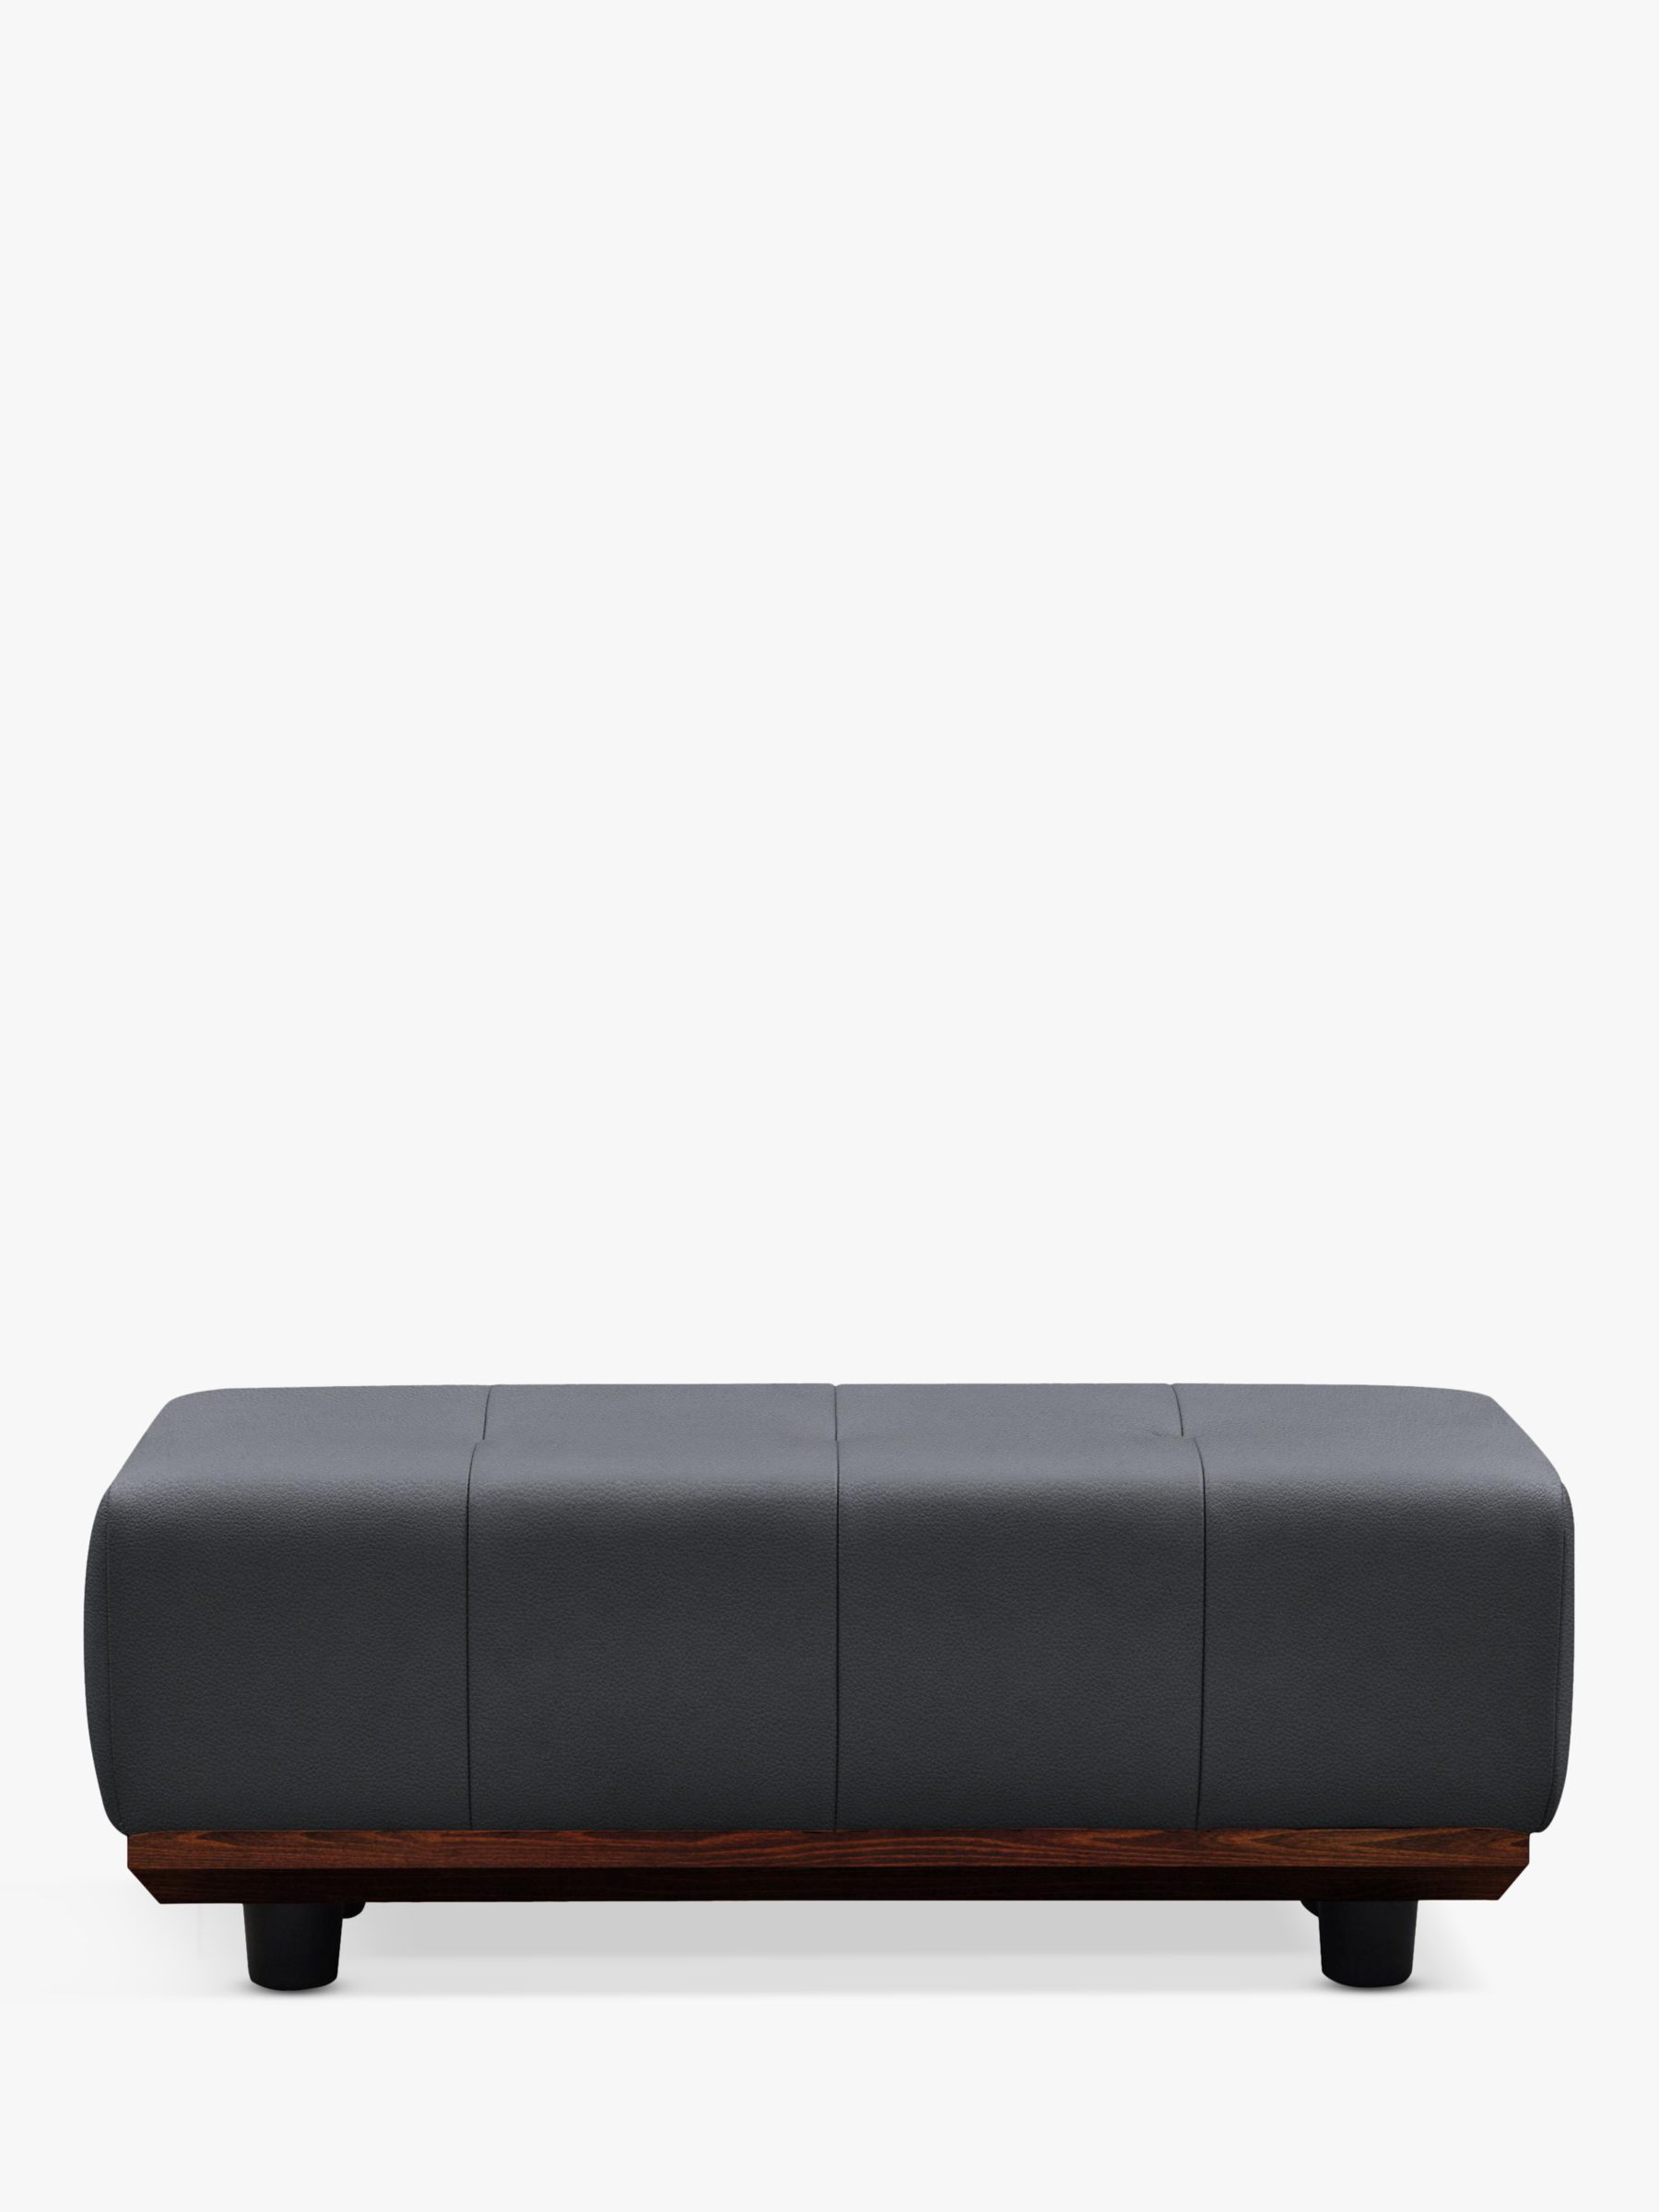 G Plan Vintage The Seventy One Leather Footstool